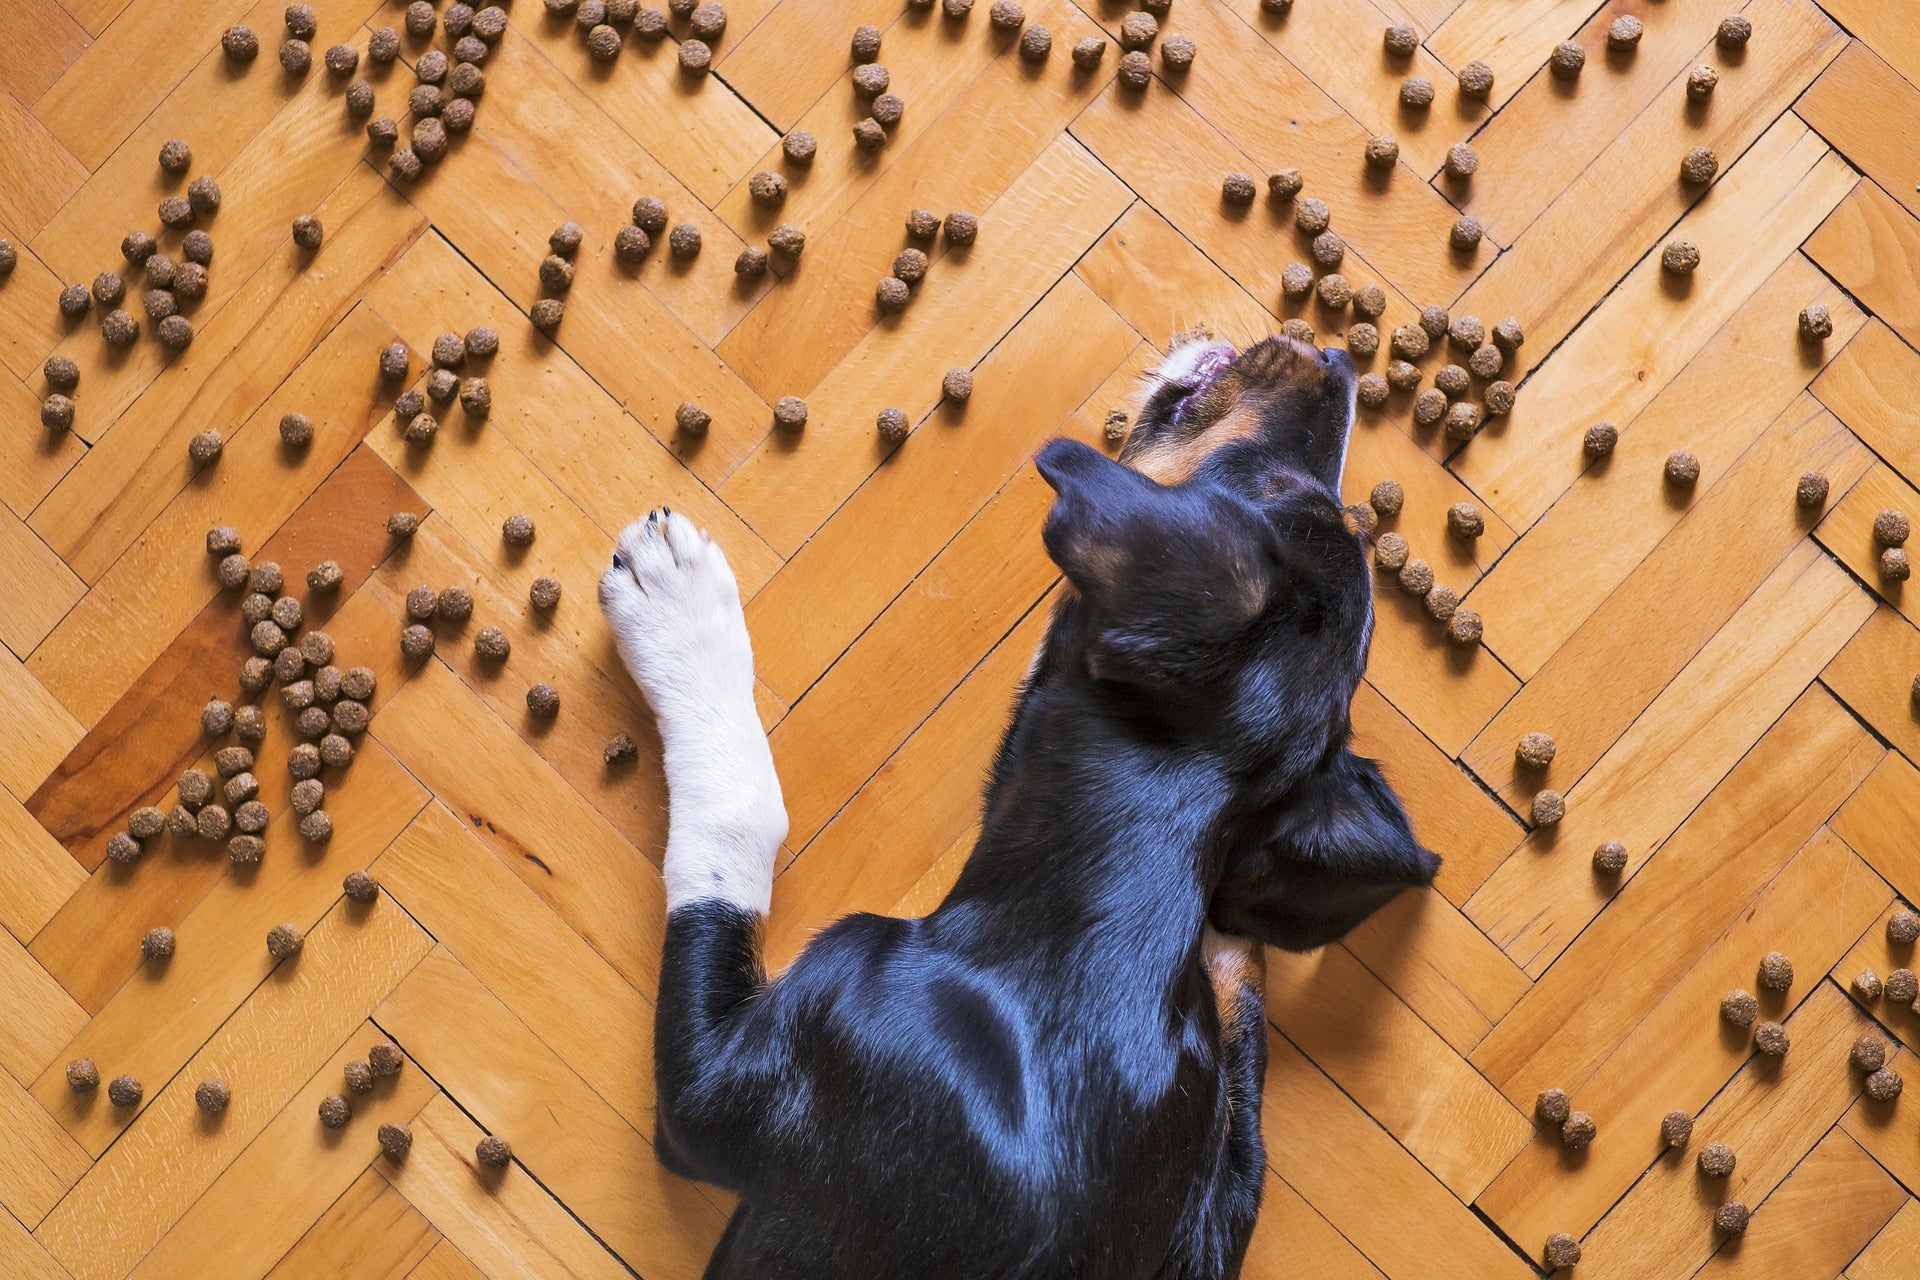 Puppy eating kibble off of the floor